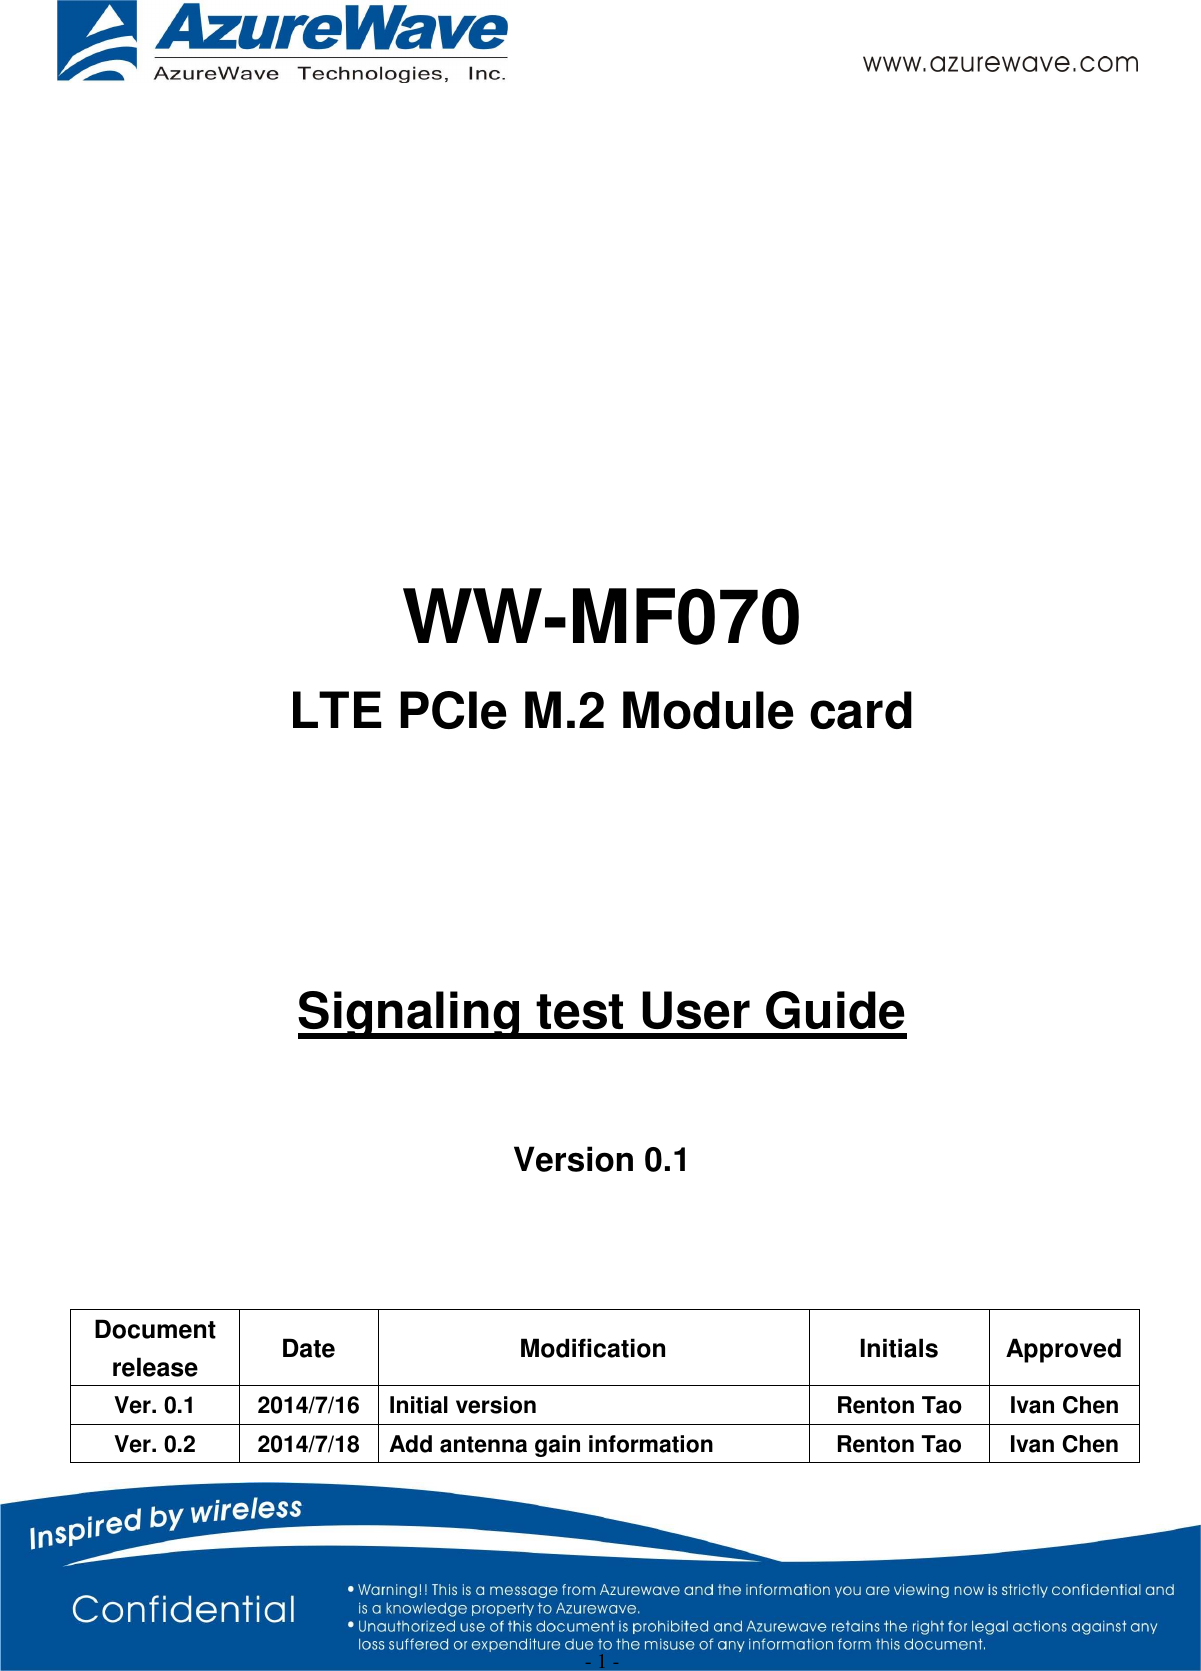                                                   - 1 -       WW-MF070 LTE PCIe M.2 Module card    Signaling test User Guide  Version 0.1   Document release  Date  Modification  Initials  Approved Ver. 0.1  2014/7/16 Initial version  Renton Tao  Ivan Chen Ver. 0.2  2014/7/18 Add antenna gain information  Renton Tao  Ivan Chen 